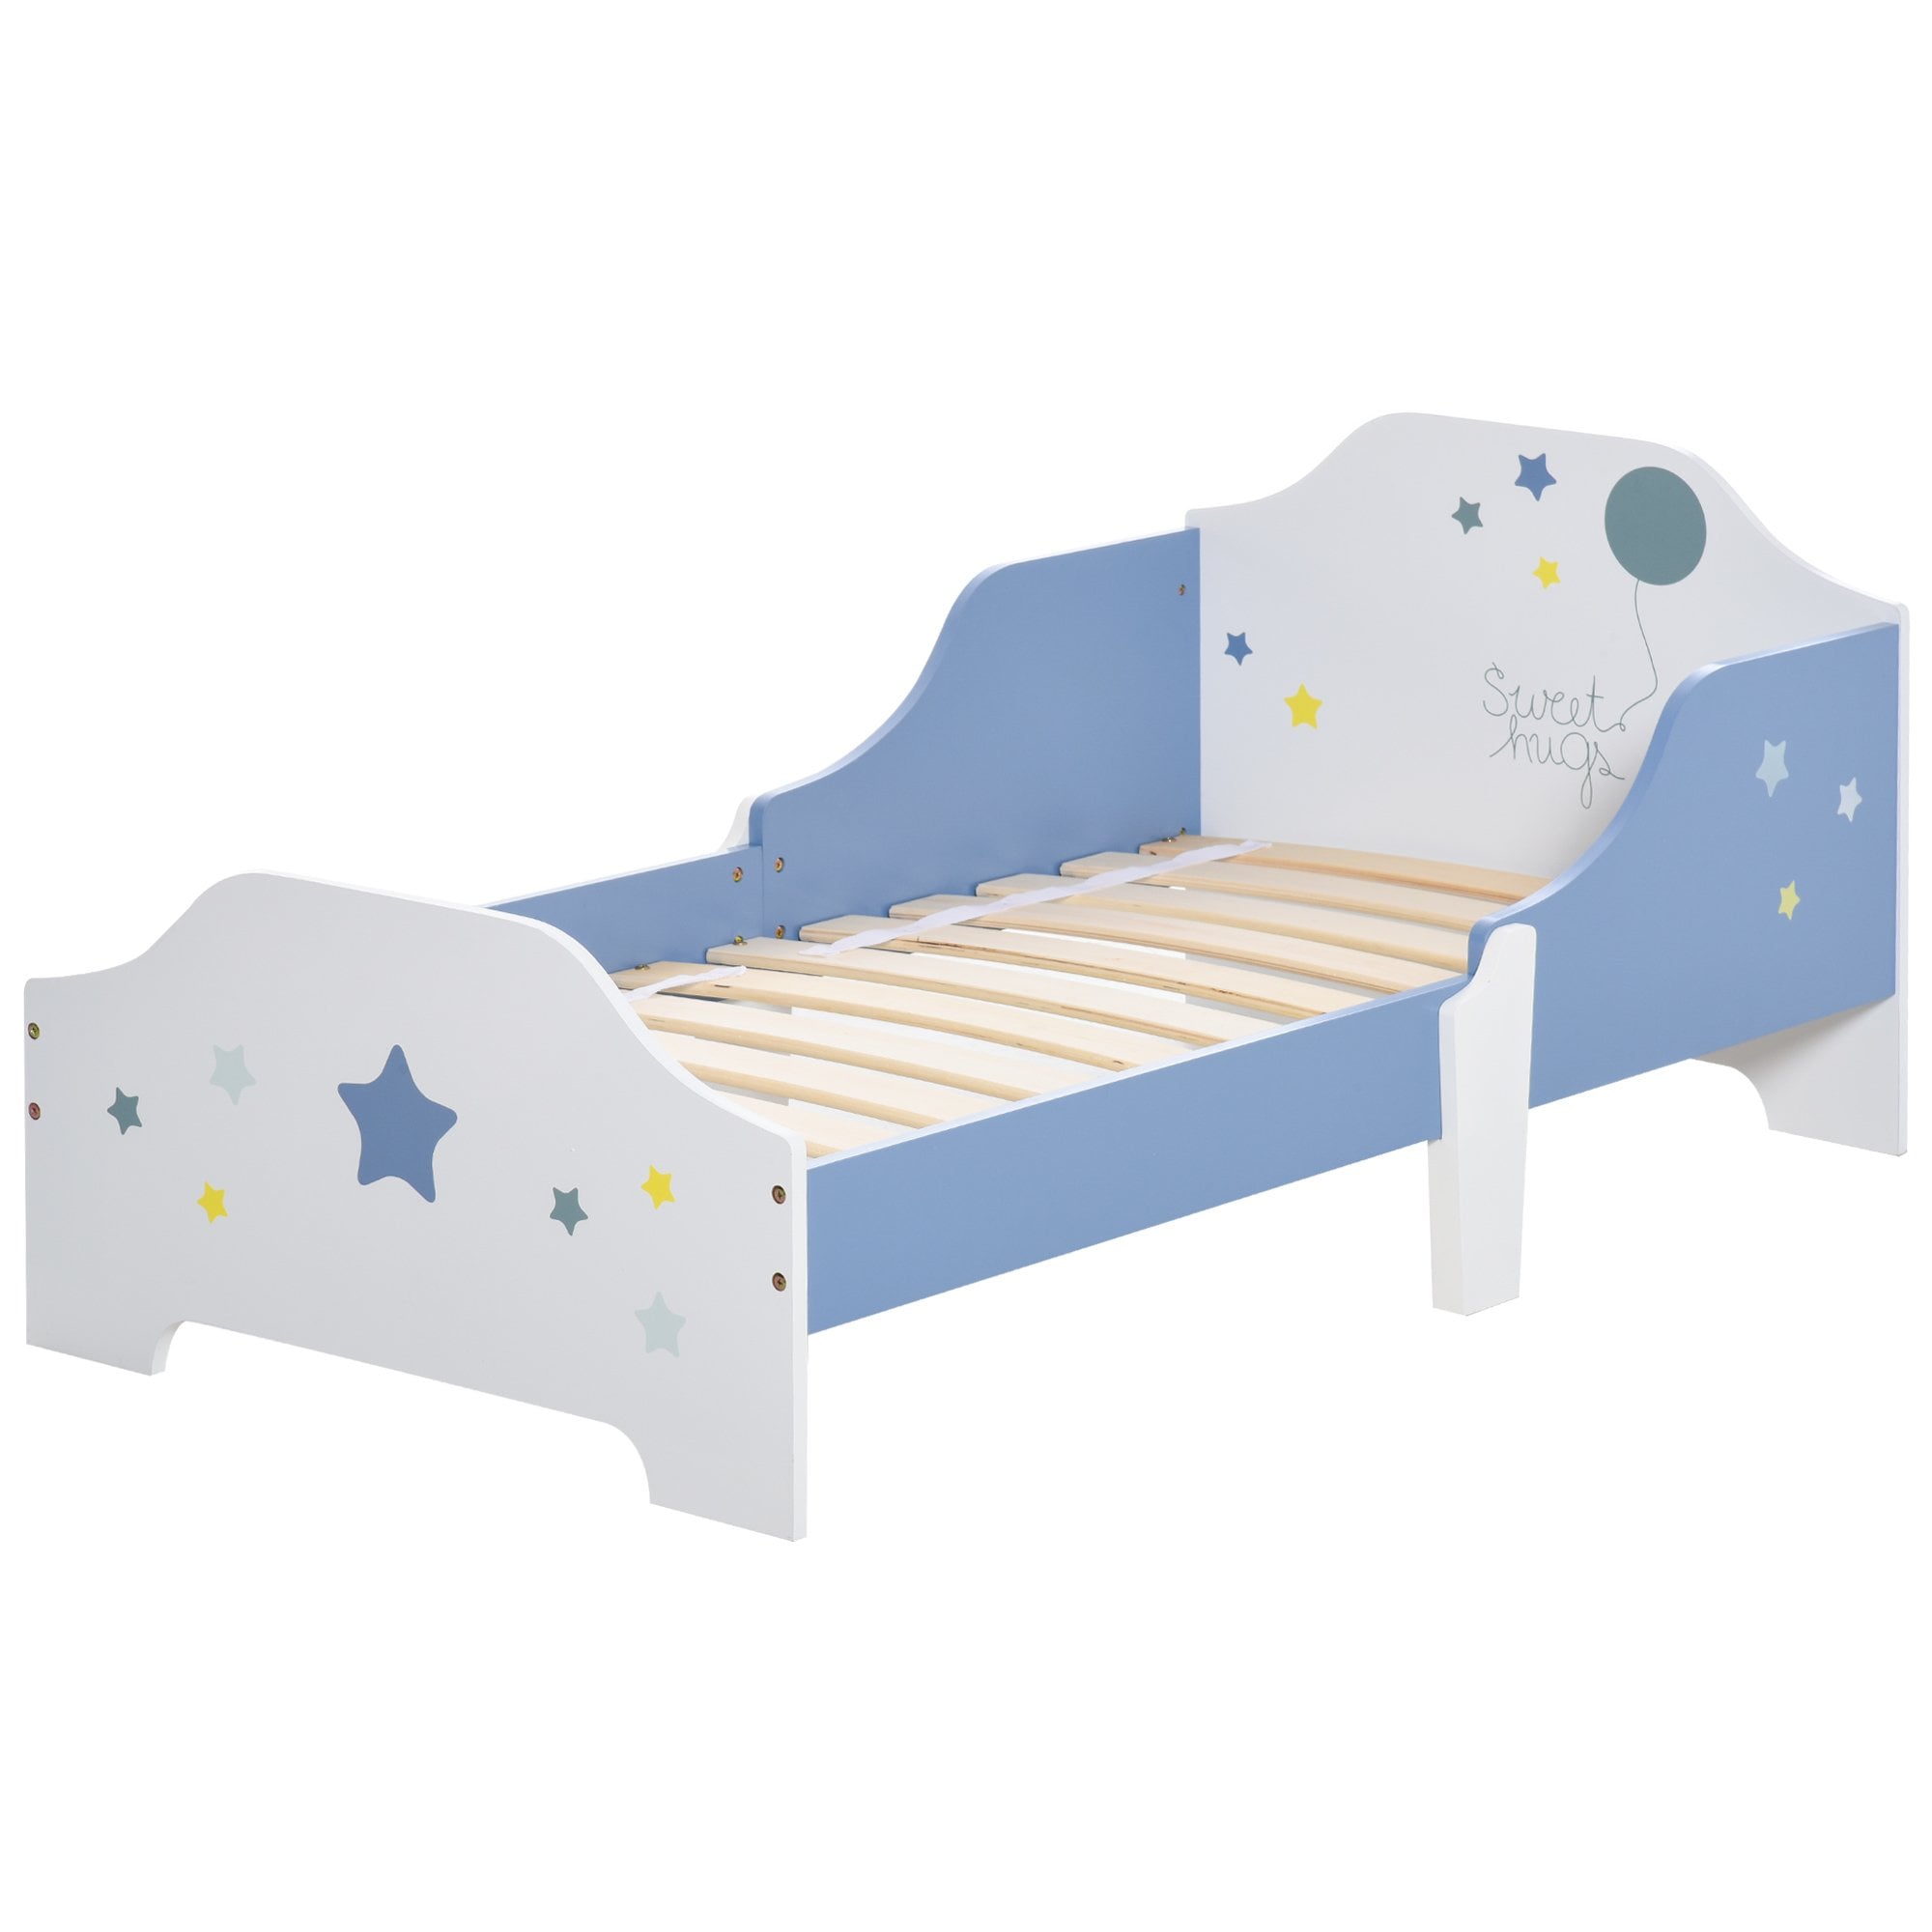 Kids Toddler Wooden Bed Round Edged with Guardrails Stars Image 143 x 74 x 59 cm Blue 59cm  | TJ Hughes